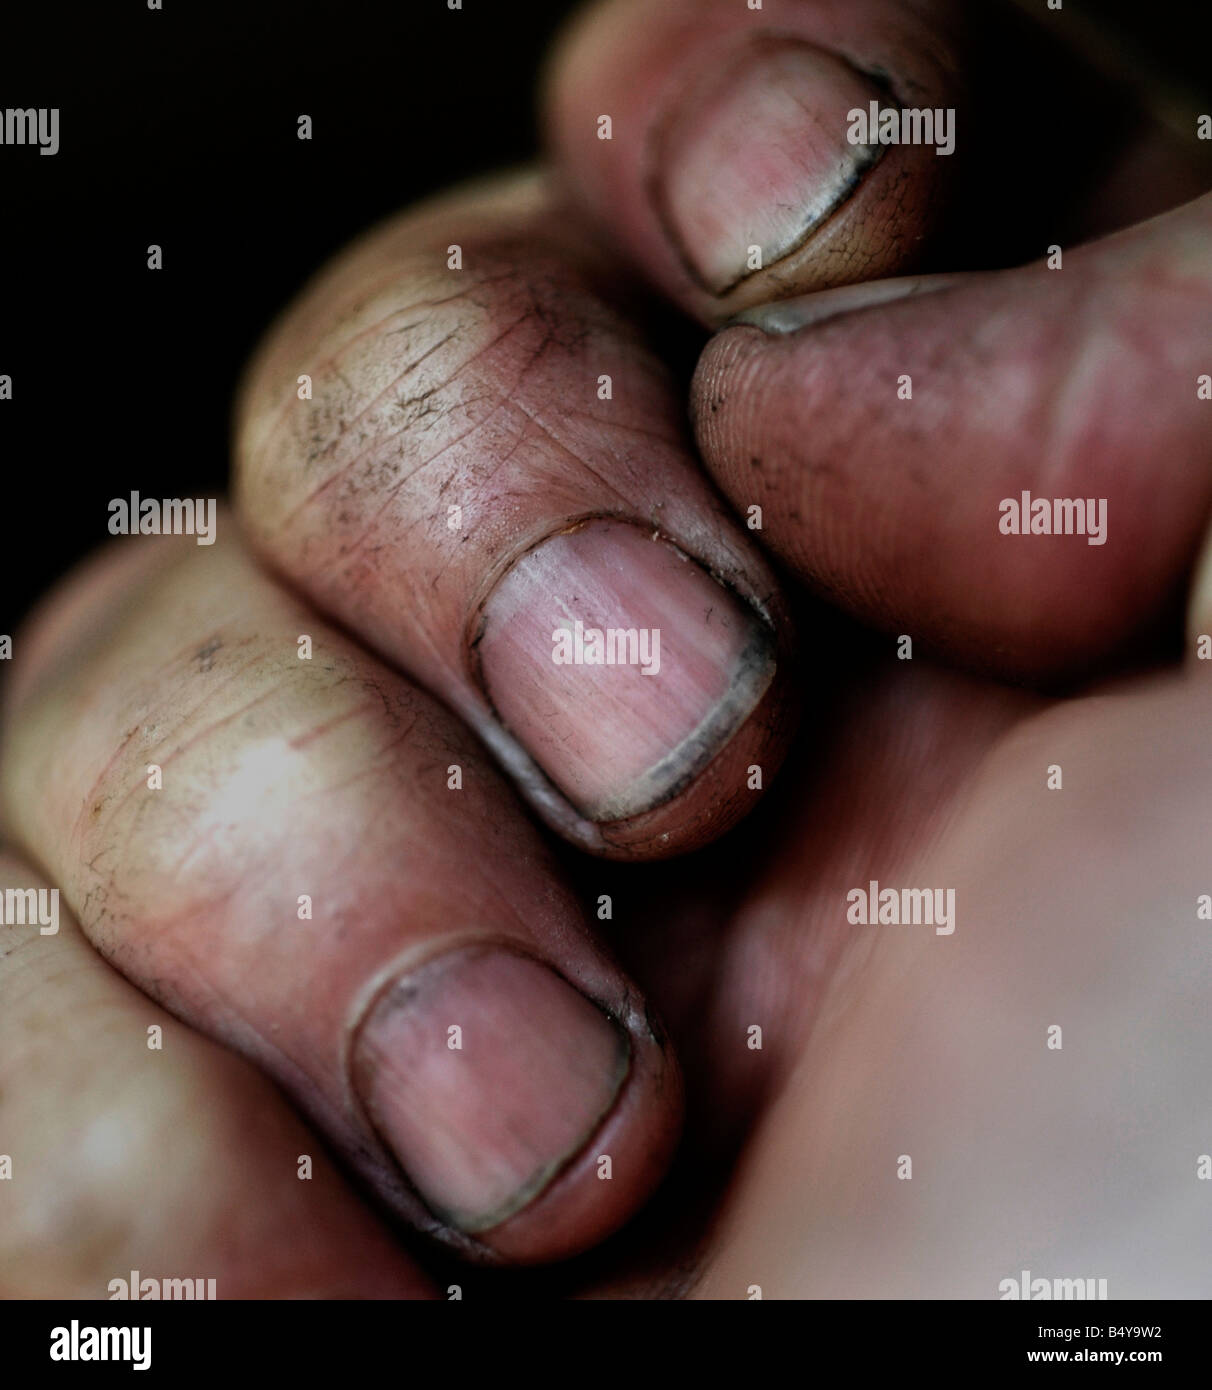 clenched fingers covered in dirt and grime Stock Photo